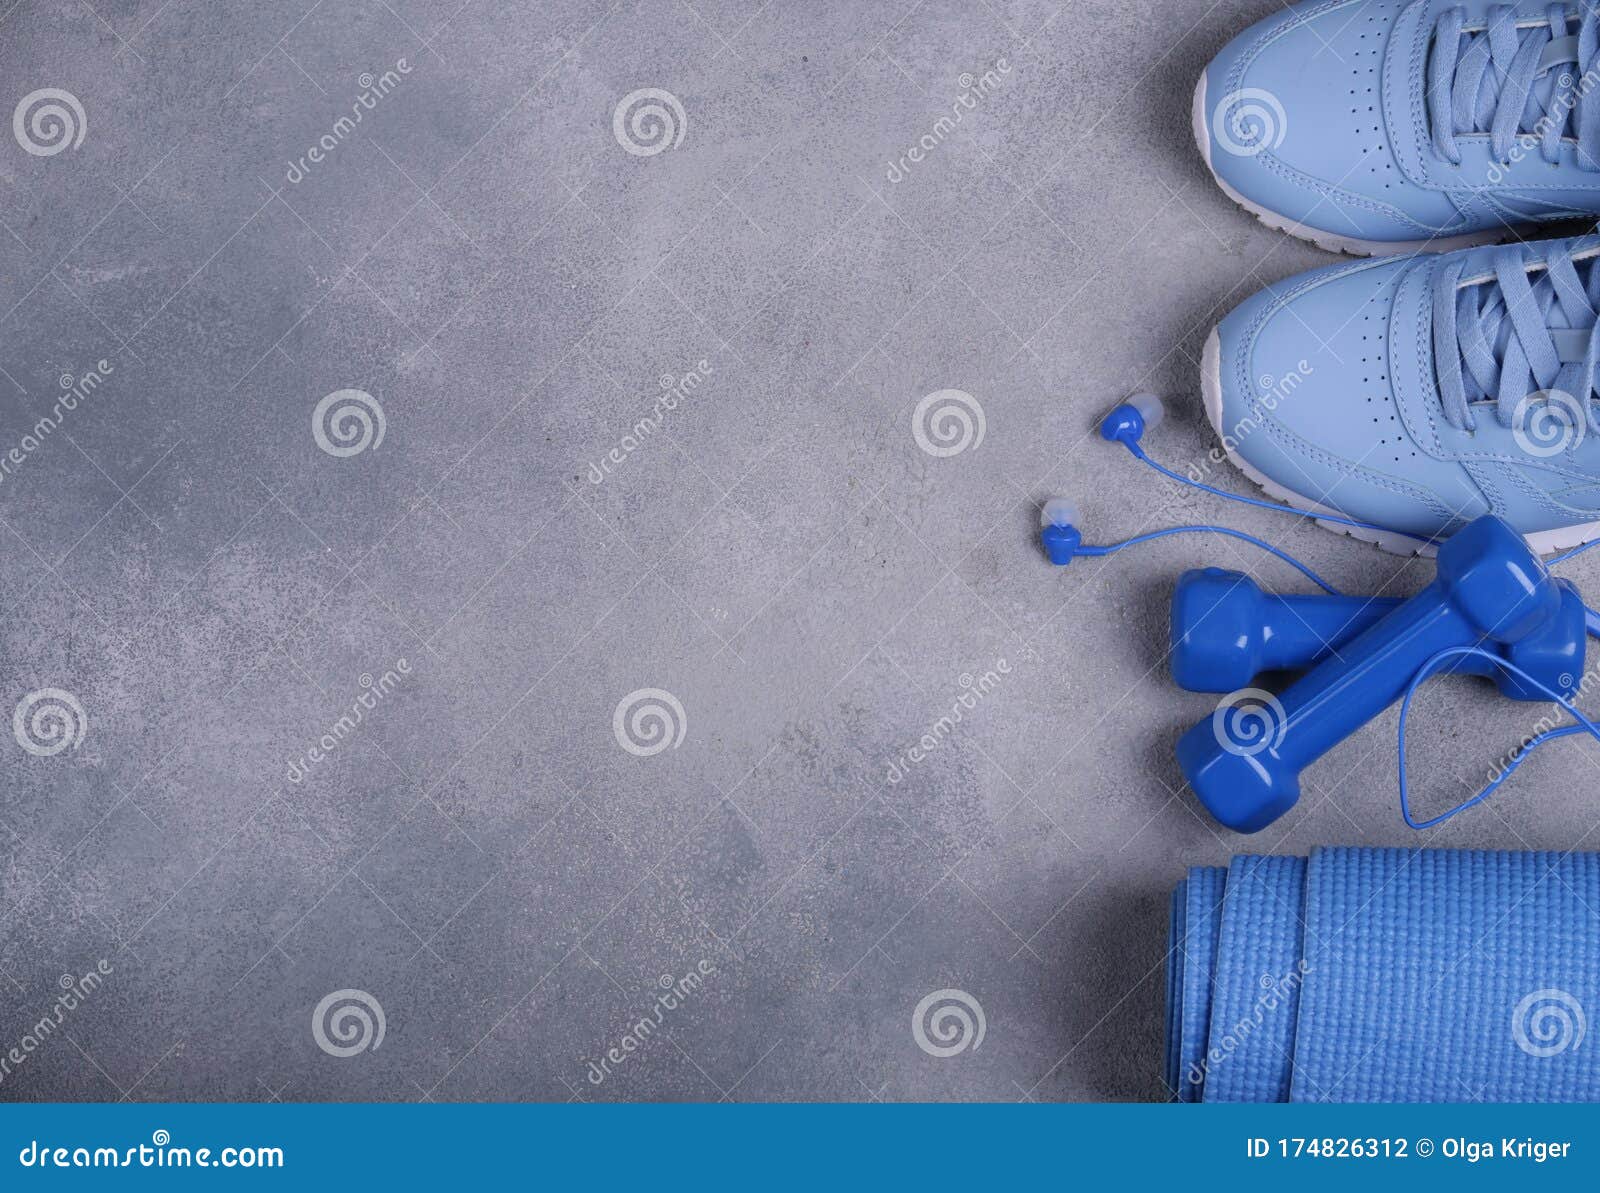 Fitness items stock photo. Image of health, items, shoes - 174826312